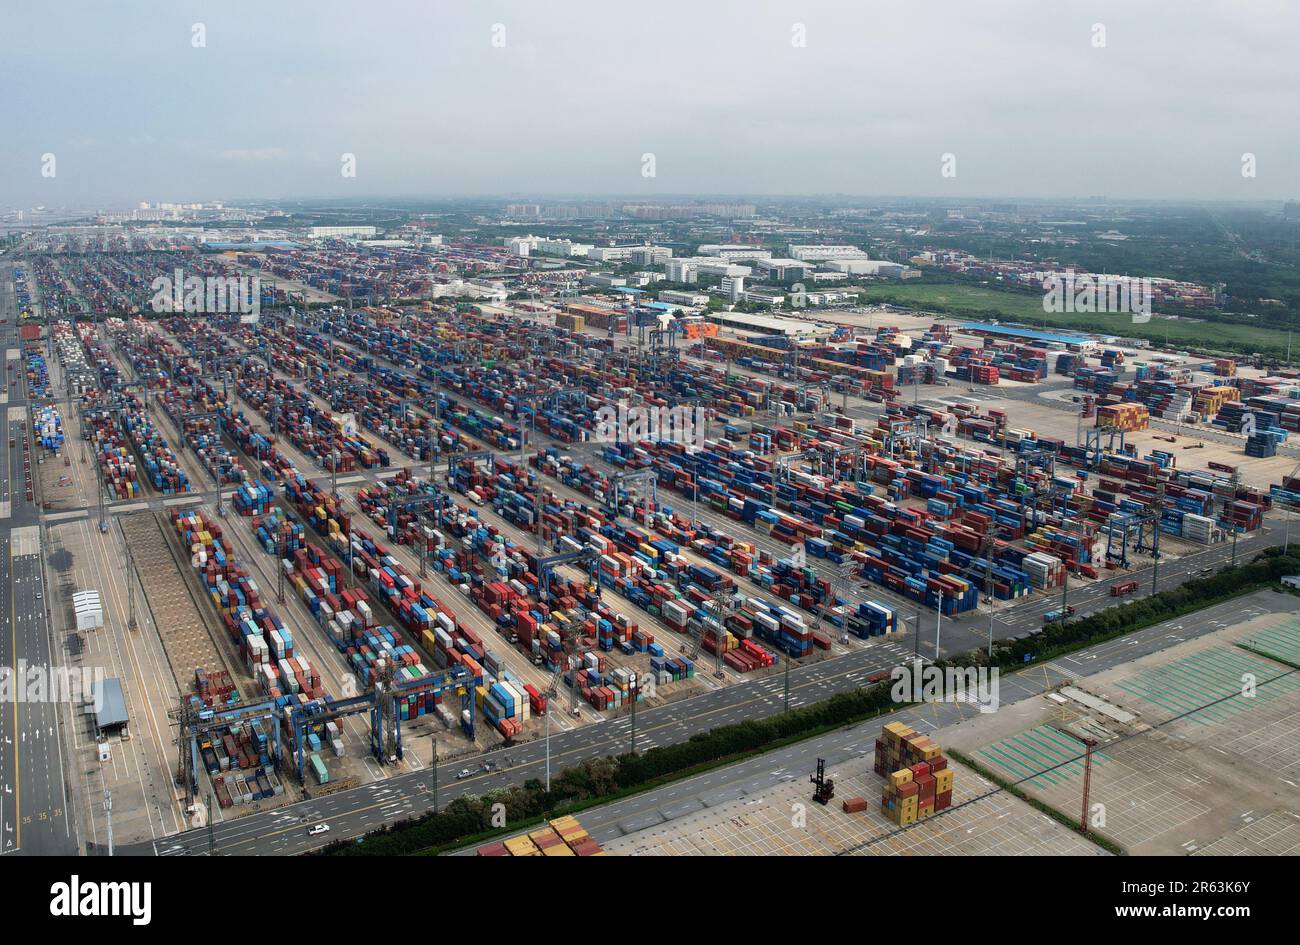 SHANGHAI, CHINA - JUNE 6, 2023 - Aerial photo taken on June 6, 2023 shows container handling operations at Waigaoqiao Port area of Shanghai Port in Sh Stock Photo